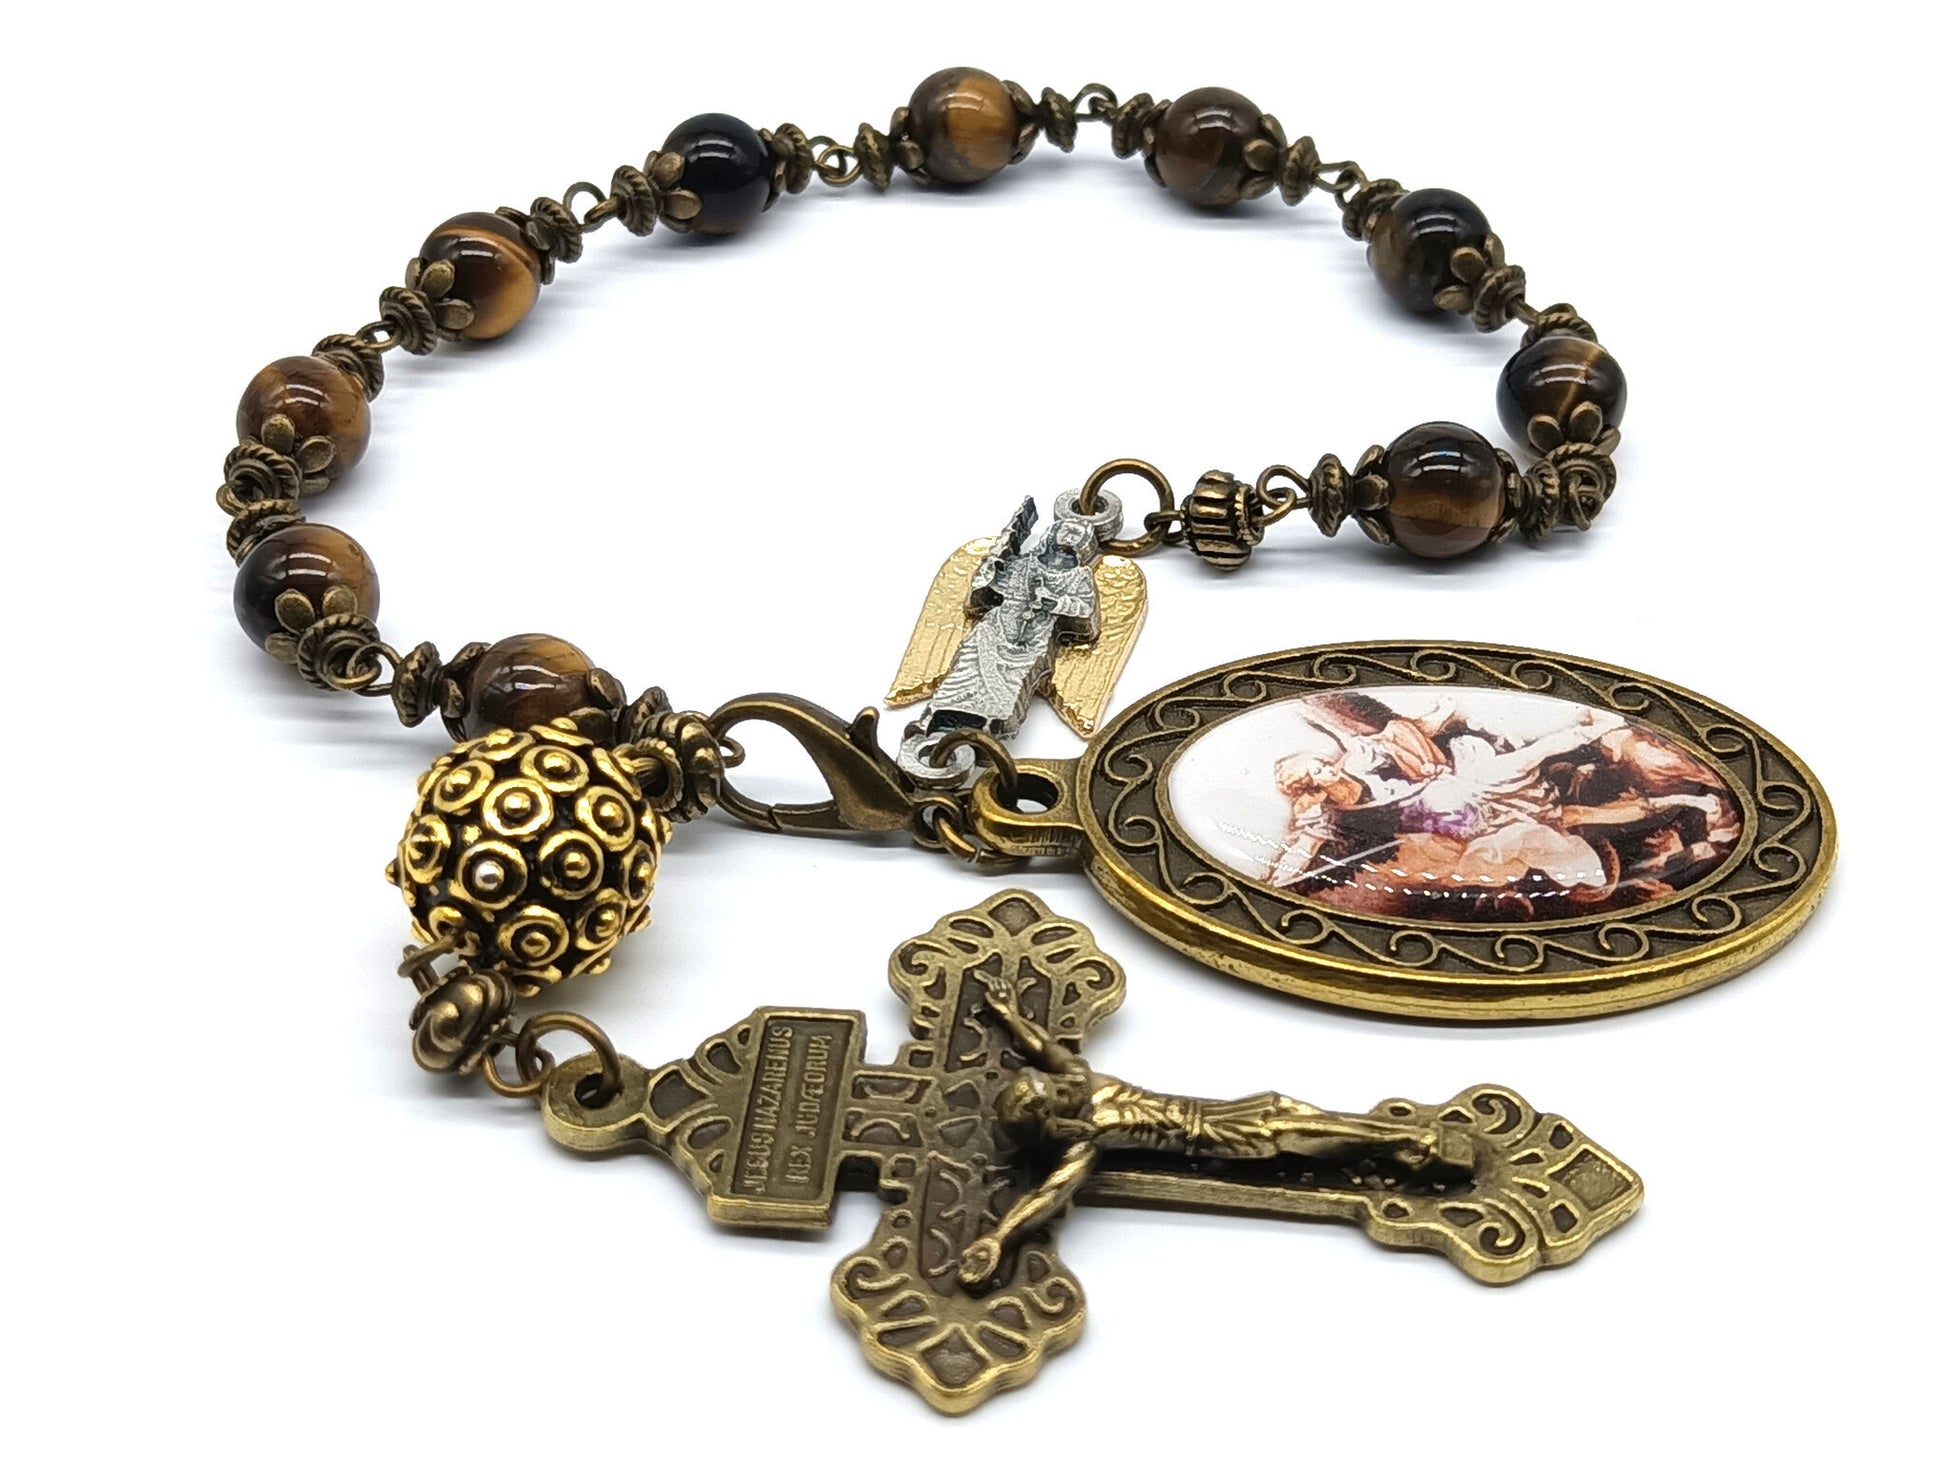 Saint Michael unique rosary beads single decade with tigers eye gemstone beads, bronze pardon crucifix, St. Michael picture medal, lobster clasp and gold pater bead.